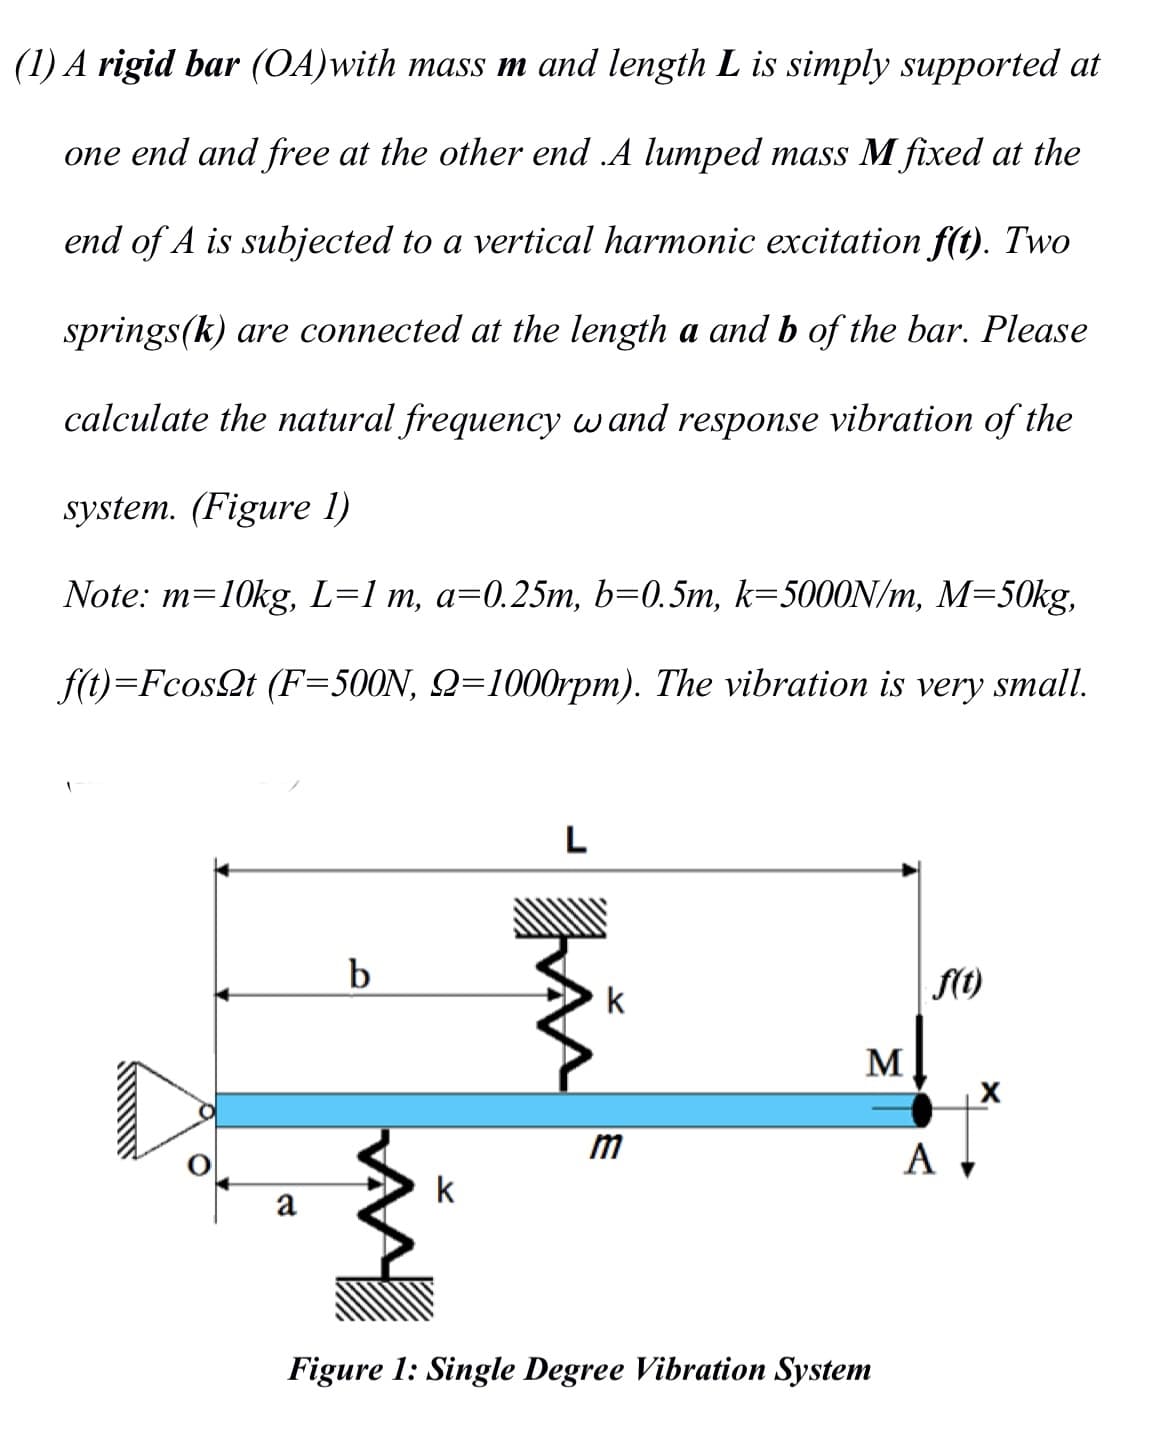 (1) A rigid bar (OA)with mass m and length L is simply supported at
one end and free at the other end .A lumped mass M fixed at the
end of A is subjected to a vertical harmonic excitation f(t). Two
springs(k) are connected at the length a and b of the bar. Please
calculate the natural frequency w and response vibration of the
system. (Figure 1)
Note: m=10kg, L=1 m, a=0.25m, b=0.5m, k=5000N/m, M=50kg,
f(t)=FcosQt (F=500N, 2=1000rpm). The vibration is very small.
a
b
k
L
MAA
m
M
Figure 1: Single Degree Vibration System
f(t)
A
X